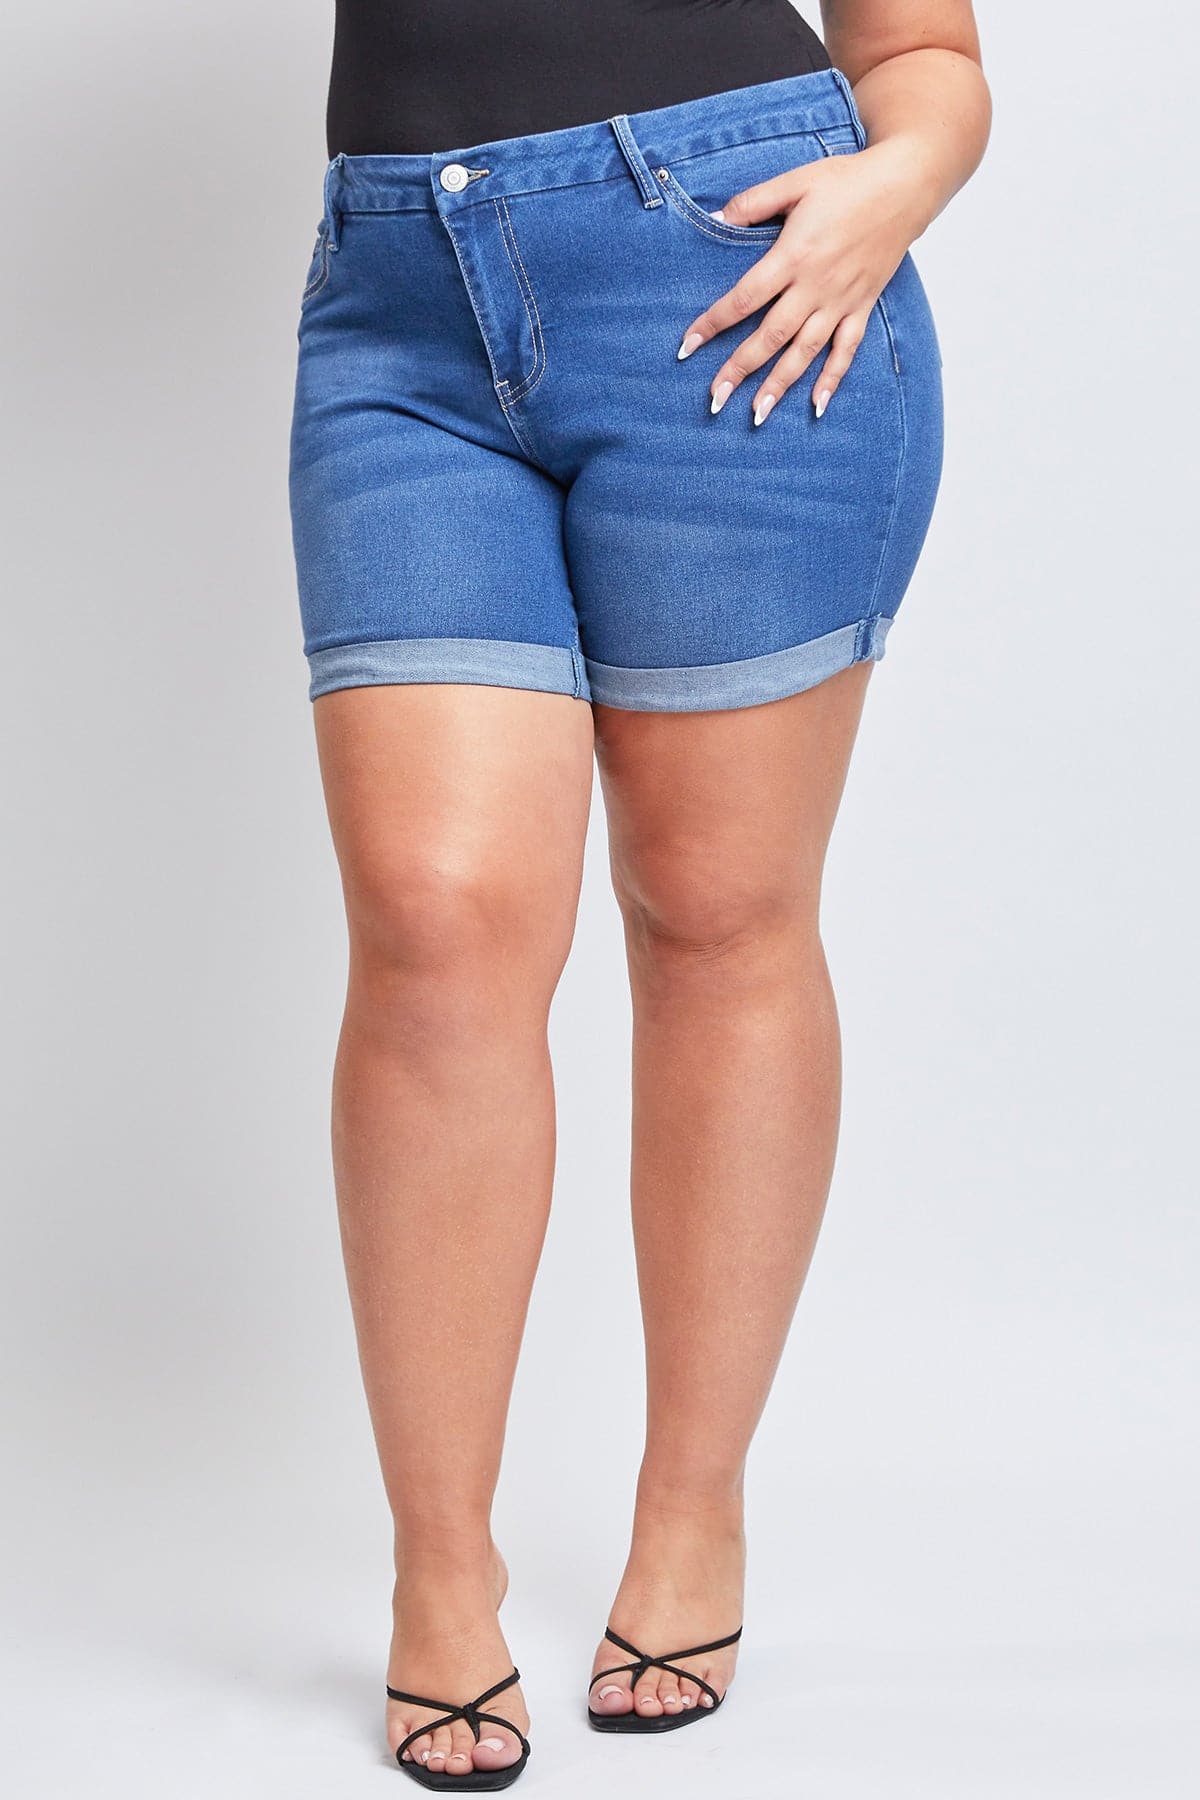 Plus Size Women's Curvy Fit Shorts With Rolled Cuffs from YMI – YMI JEANS